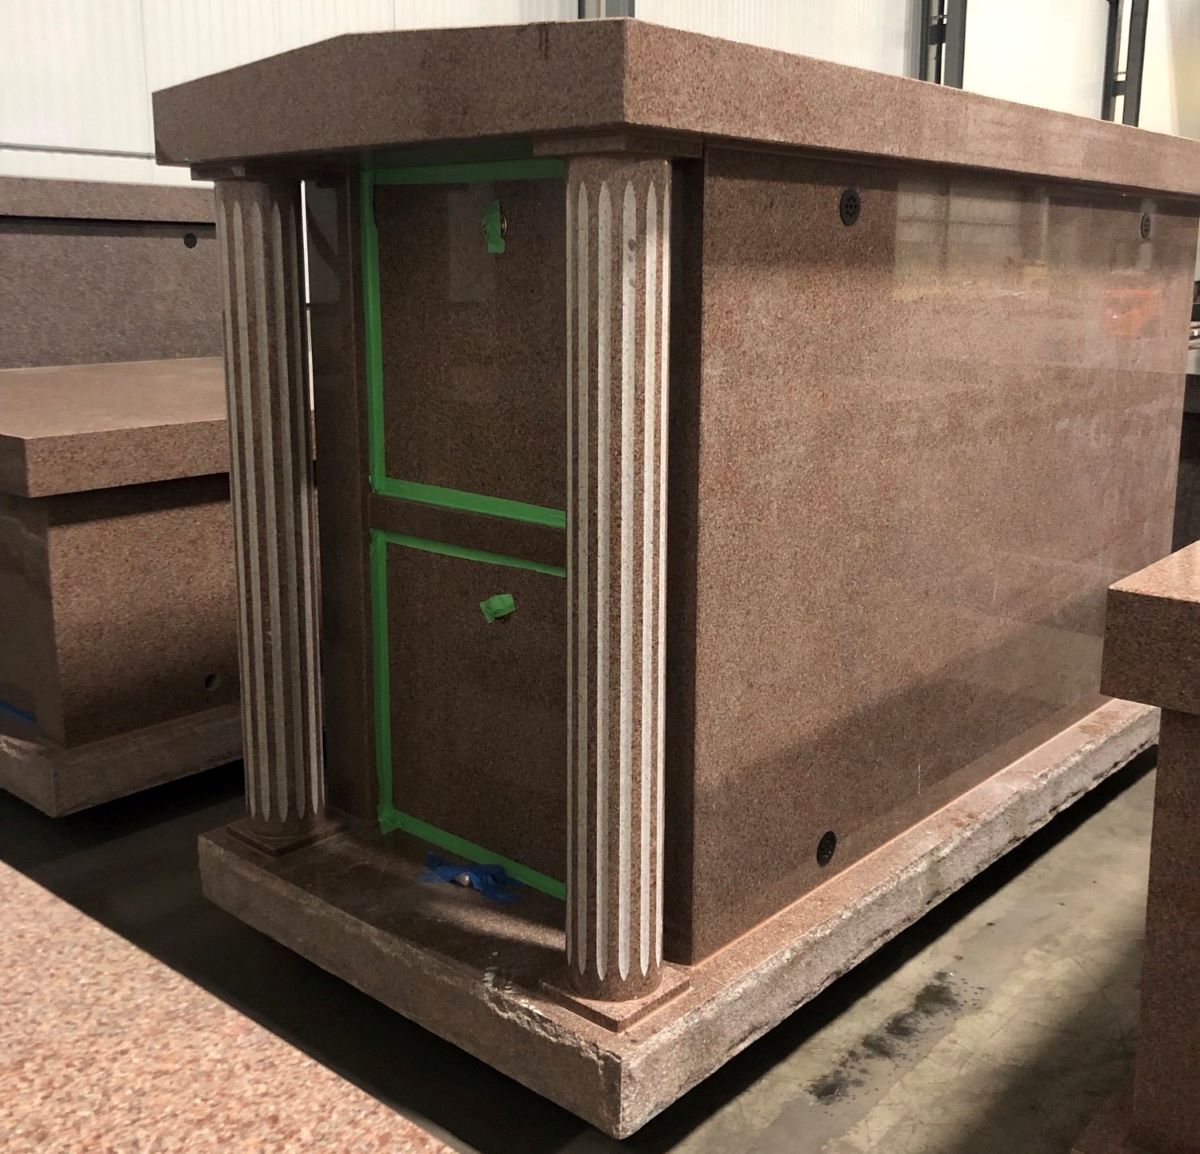 This in-stock and pre-assembled mausoleum is for sale for $34,087.00 at Rome Monument. It is built with rose colored granite, a gable style roof and round fluted columns. 02-23-2023